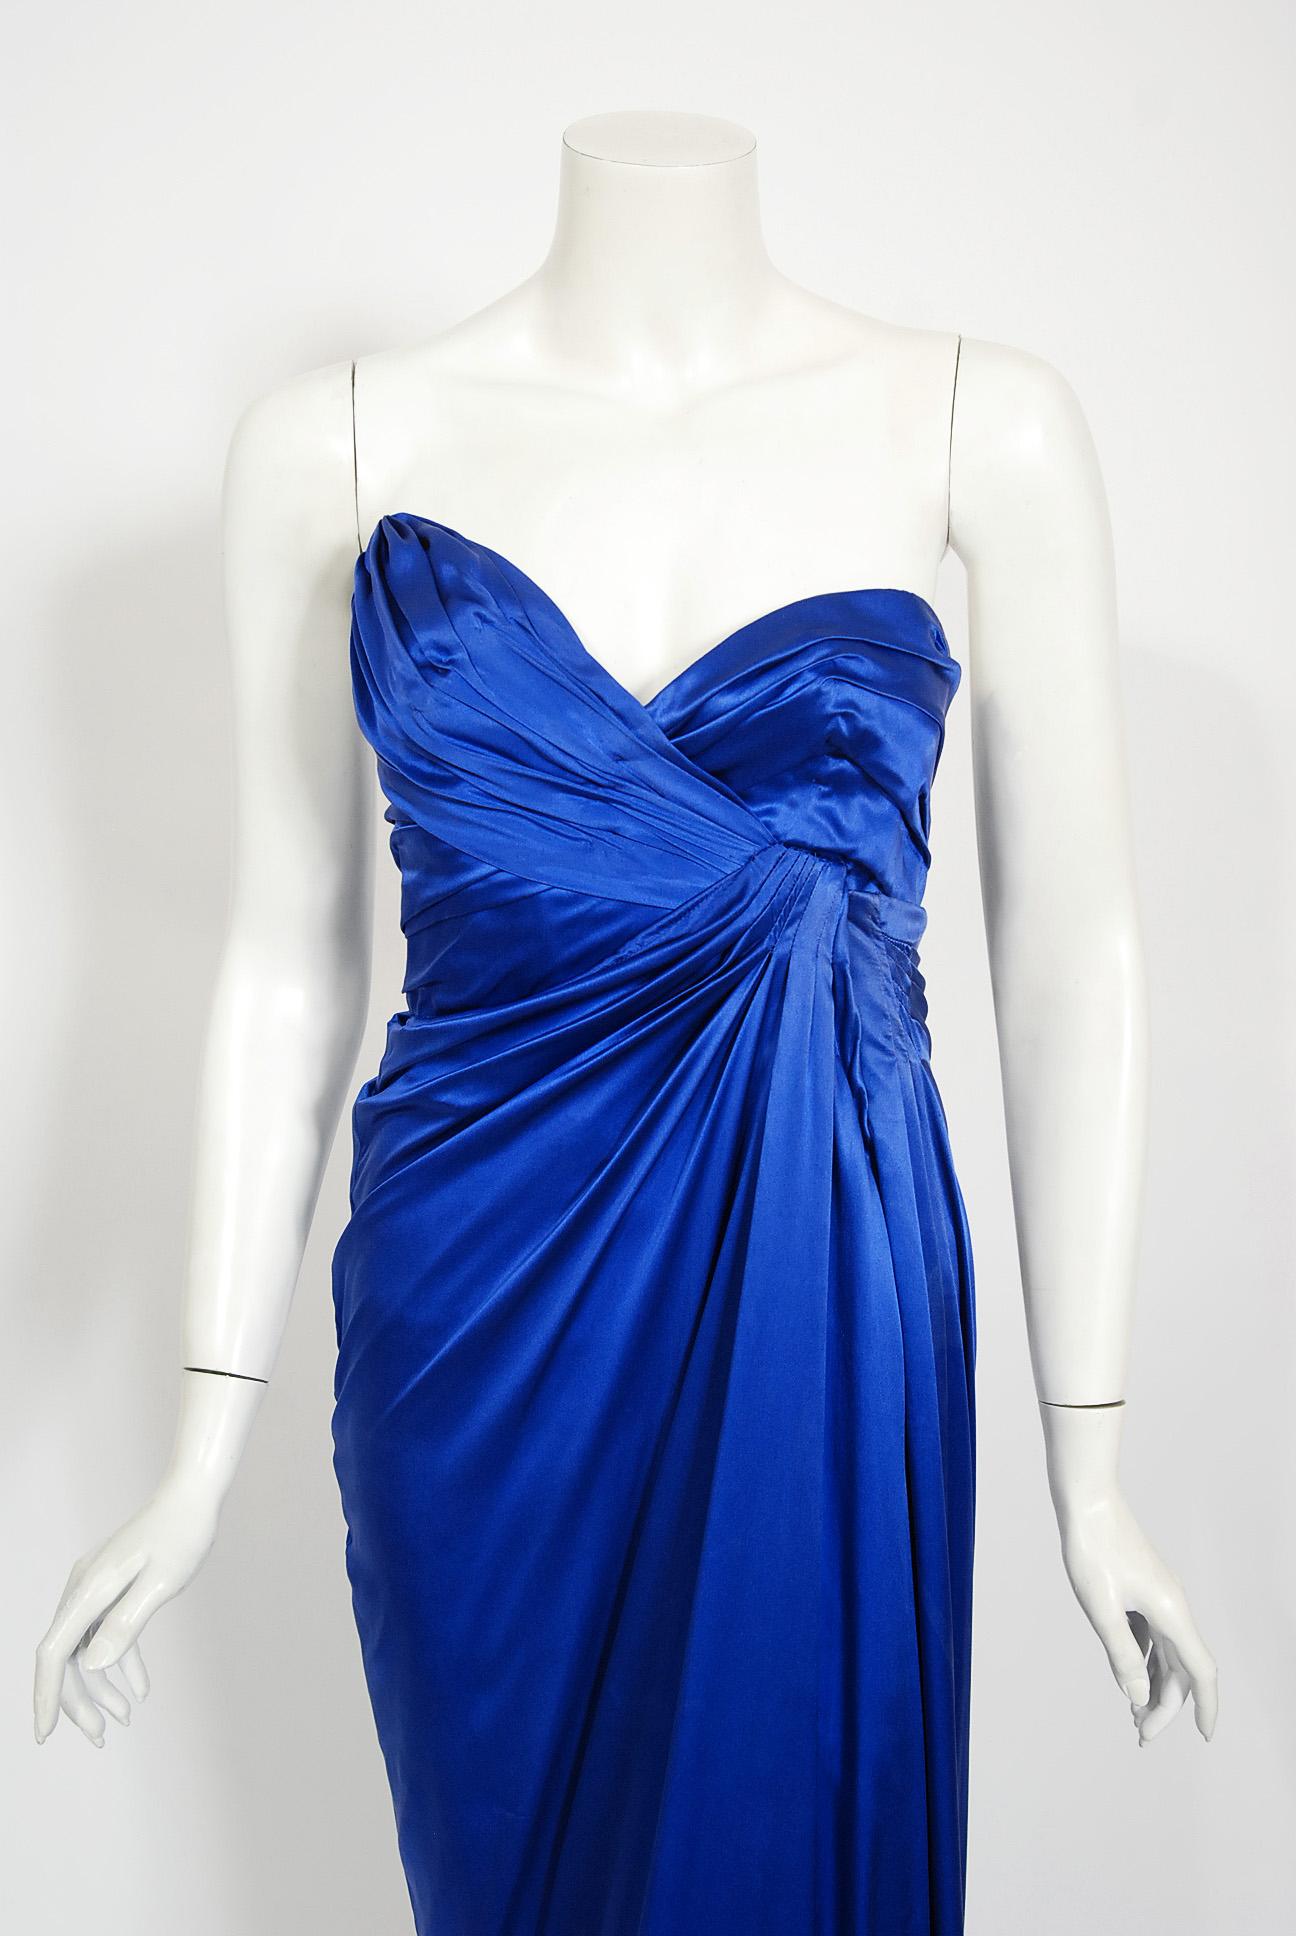 An iconic and well documented Thierry Mugler 1999 fall-winter sapphire blue silk corset strapless gown with original $6500 price tag attached. With inflation, that would be over $15,000 today. This legendary French fashion designer is known for bold